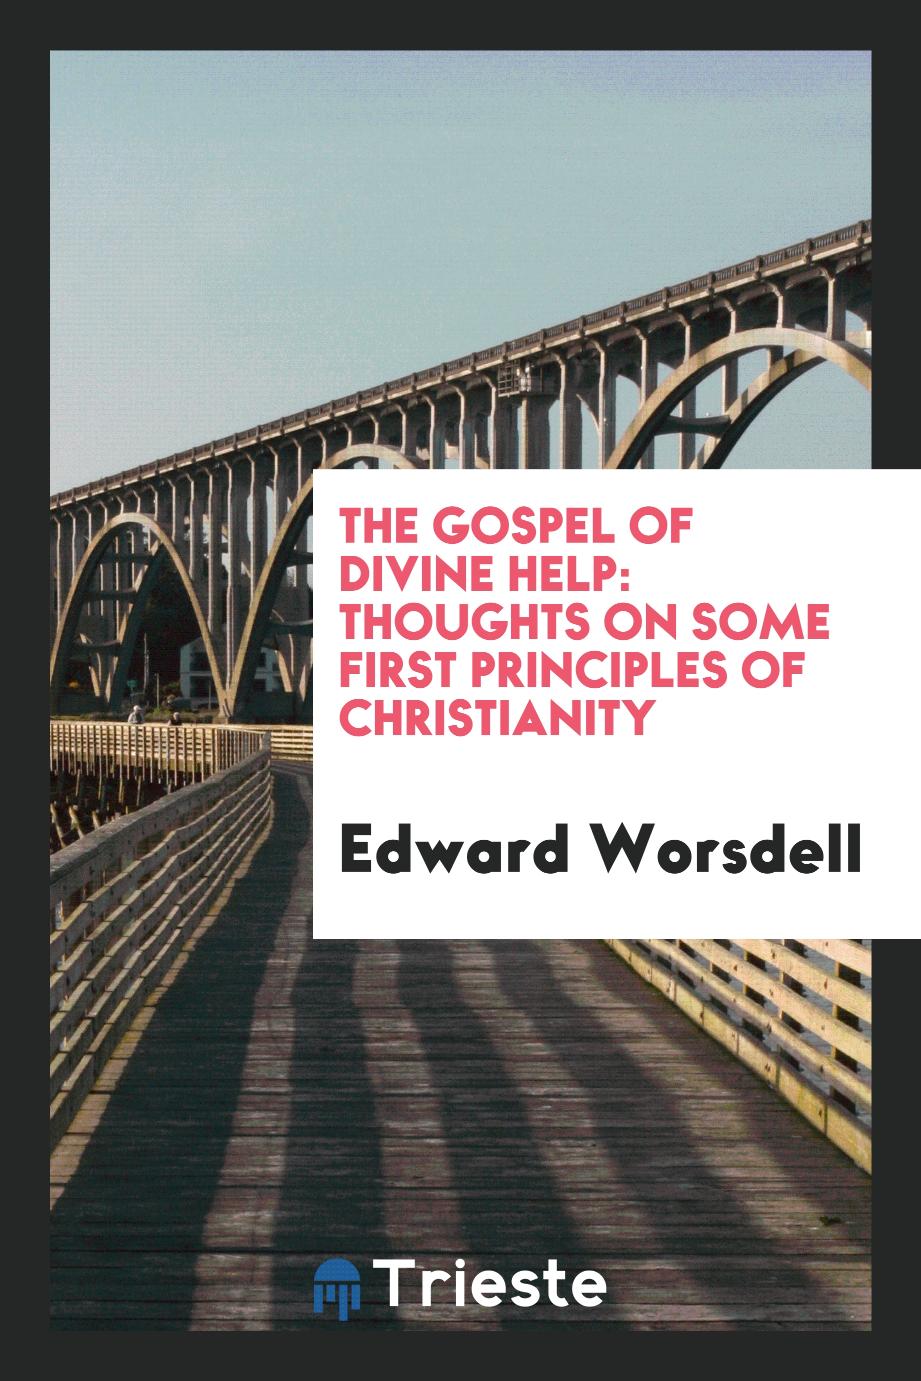 The Gospel of Divine Help: Thoughts on Some First Principles of Christianity